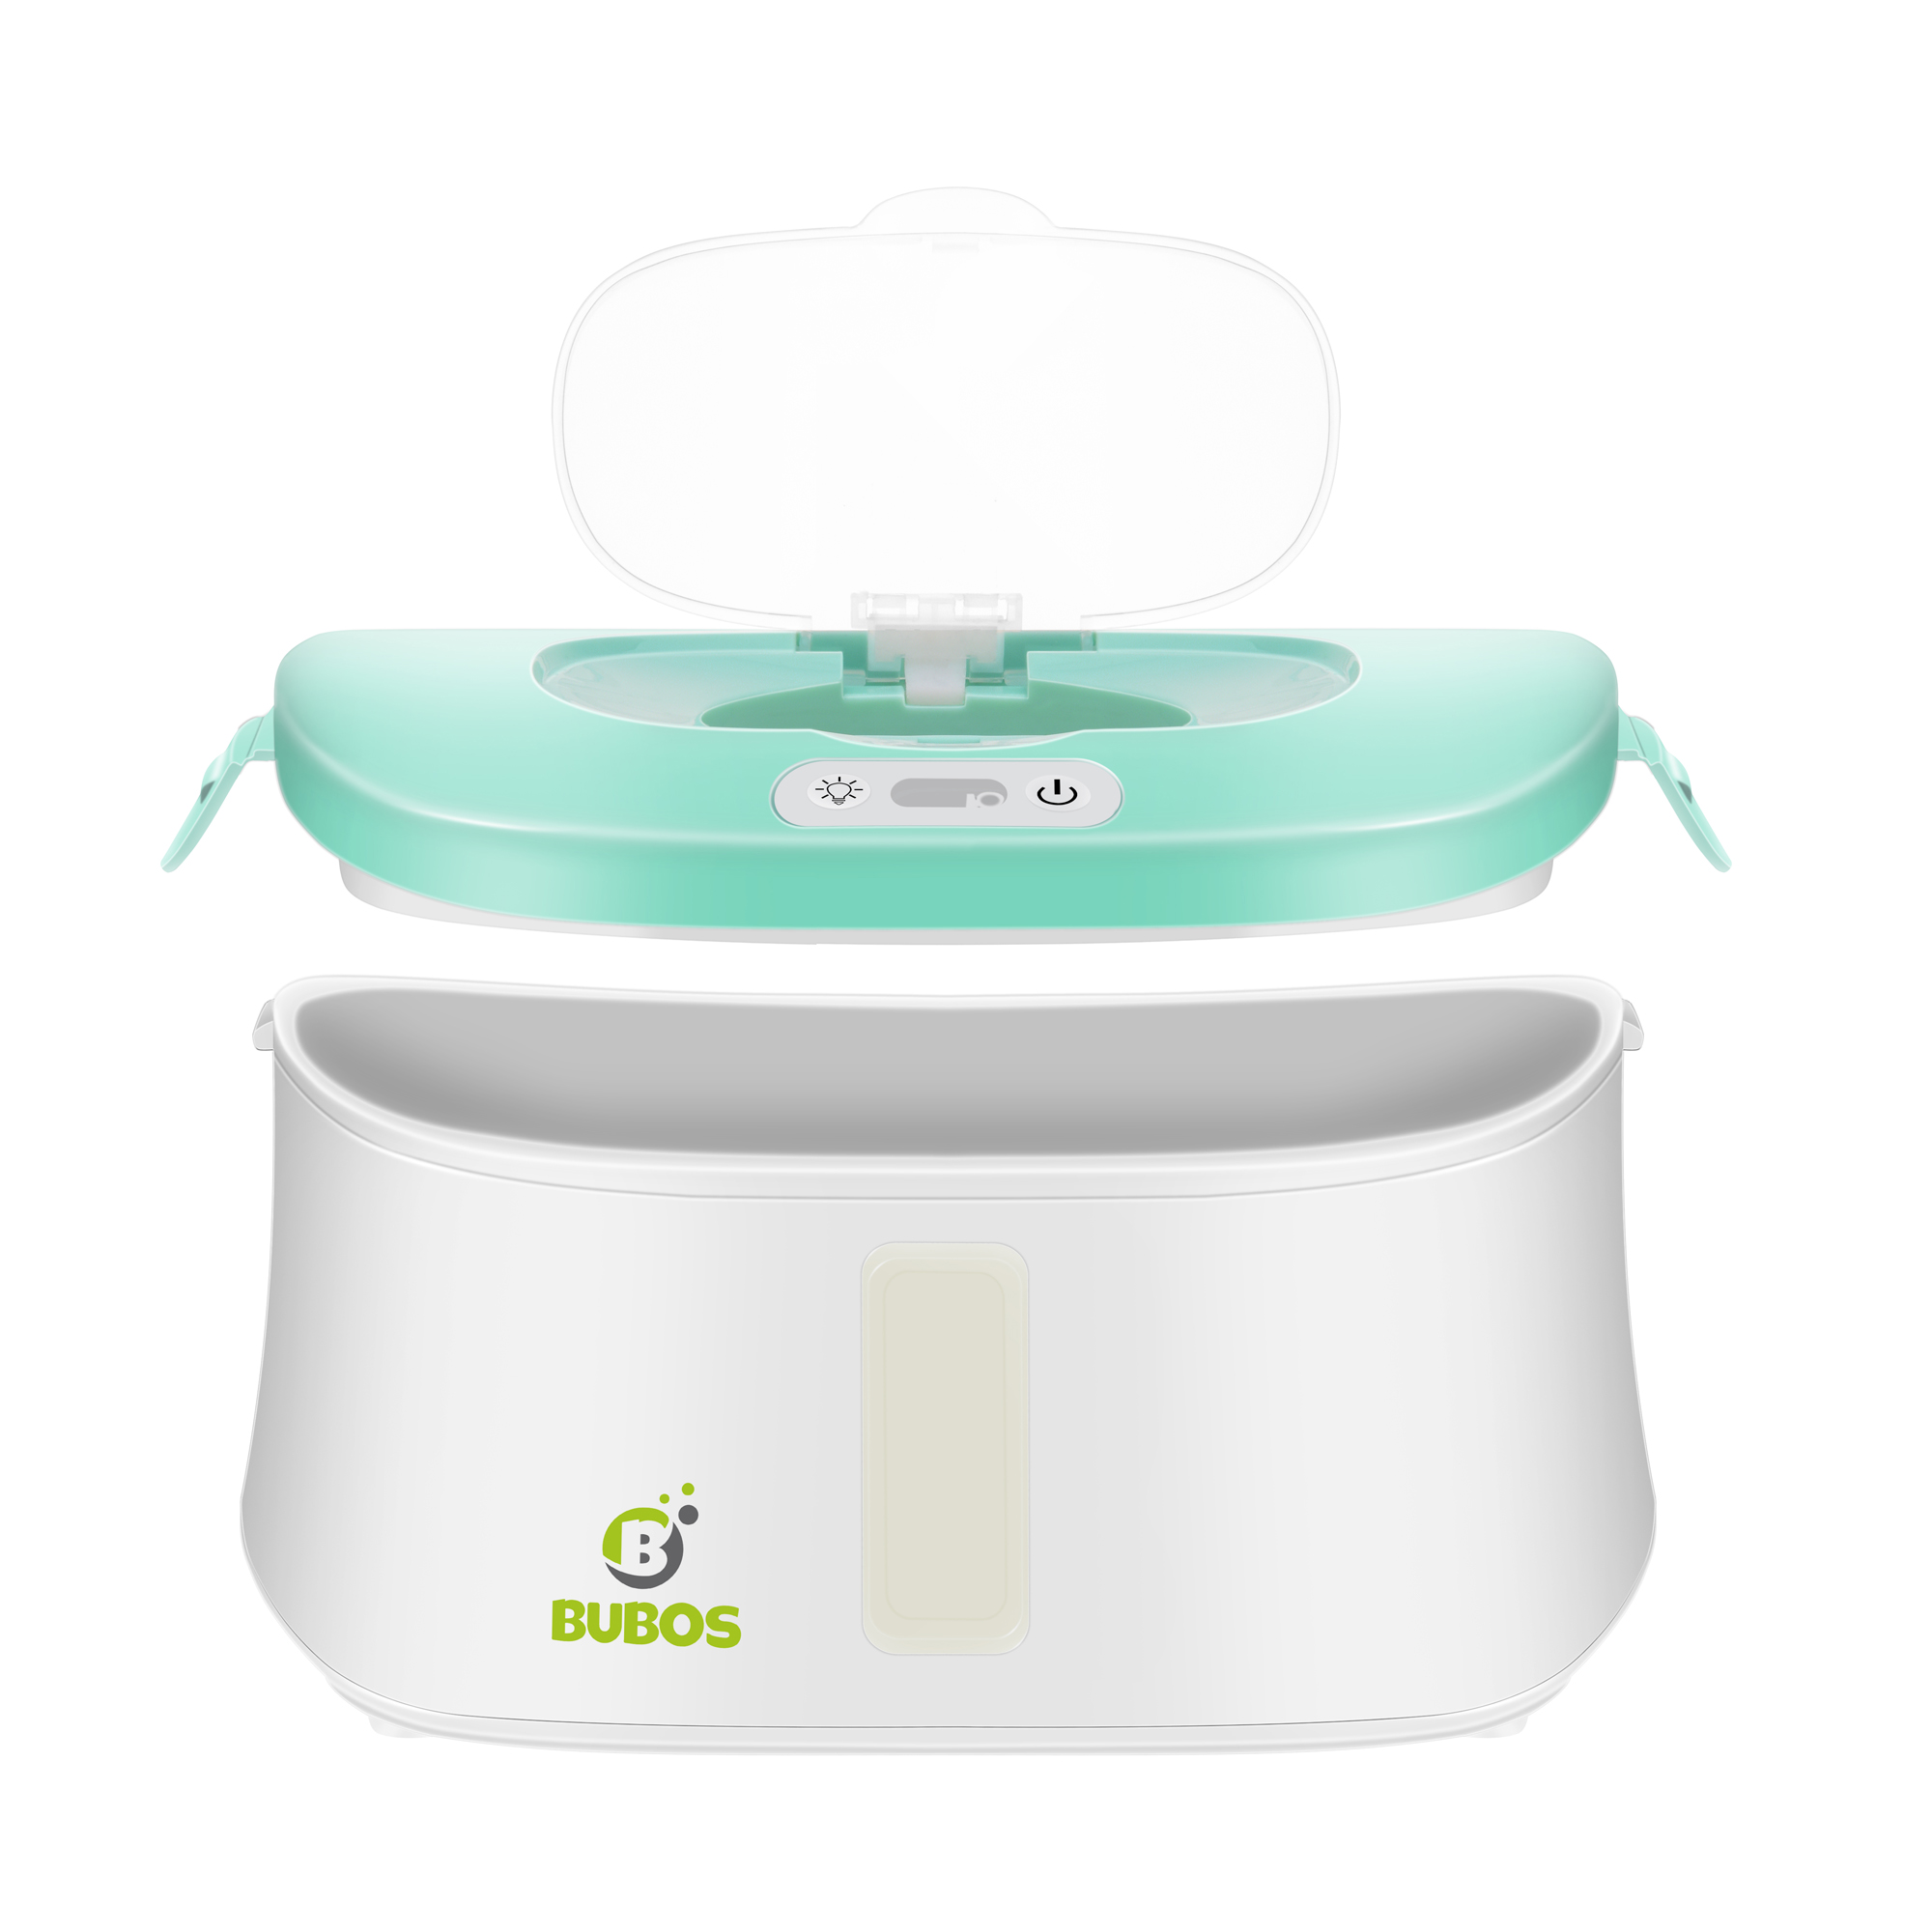 Bubos Wipe Warmer and Wet Wipes Dispenser with Advanced LED Night Light 